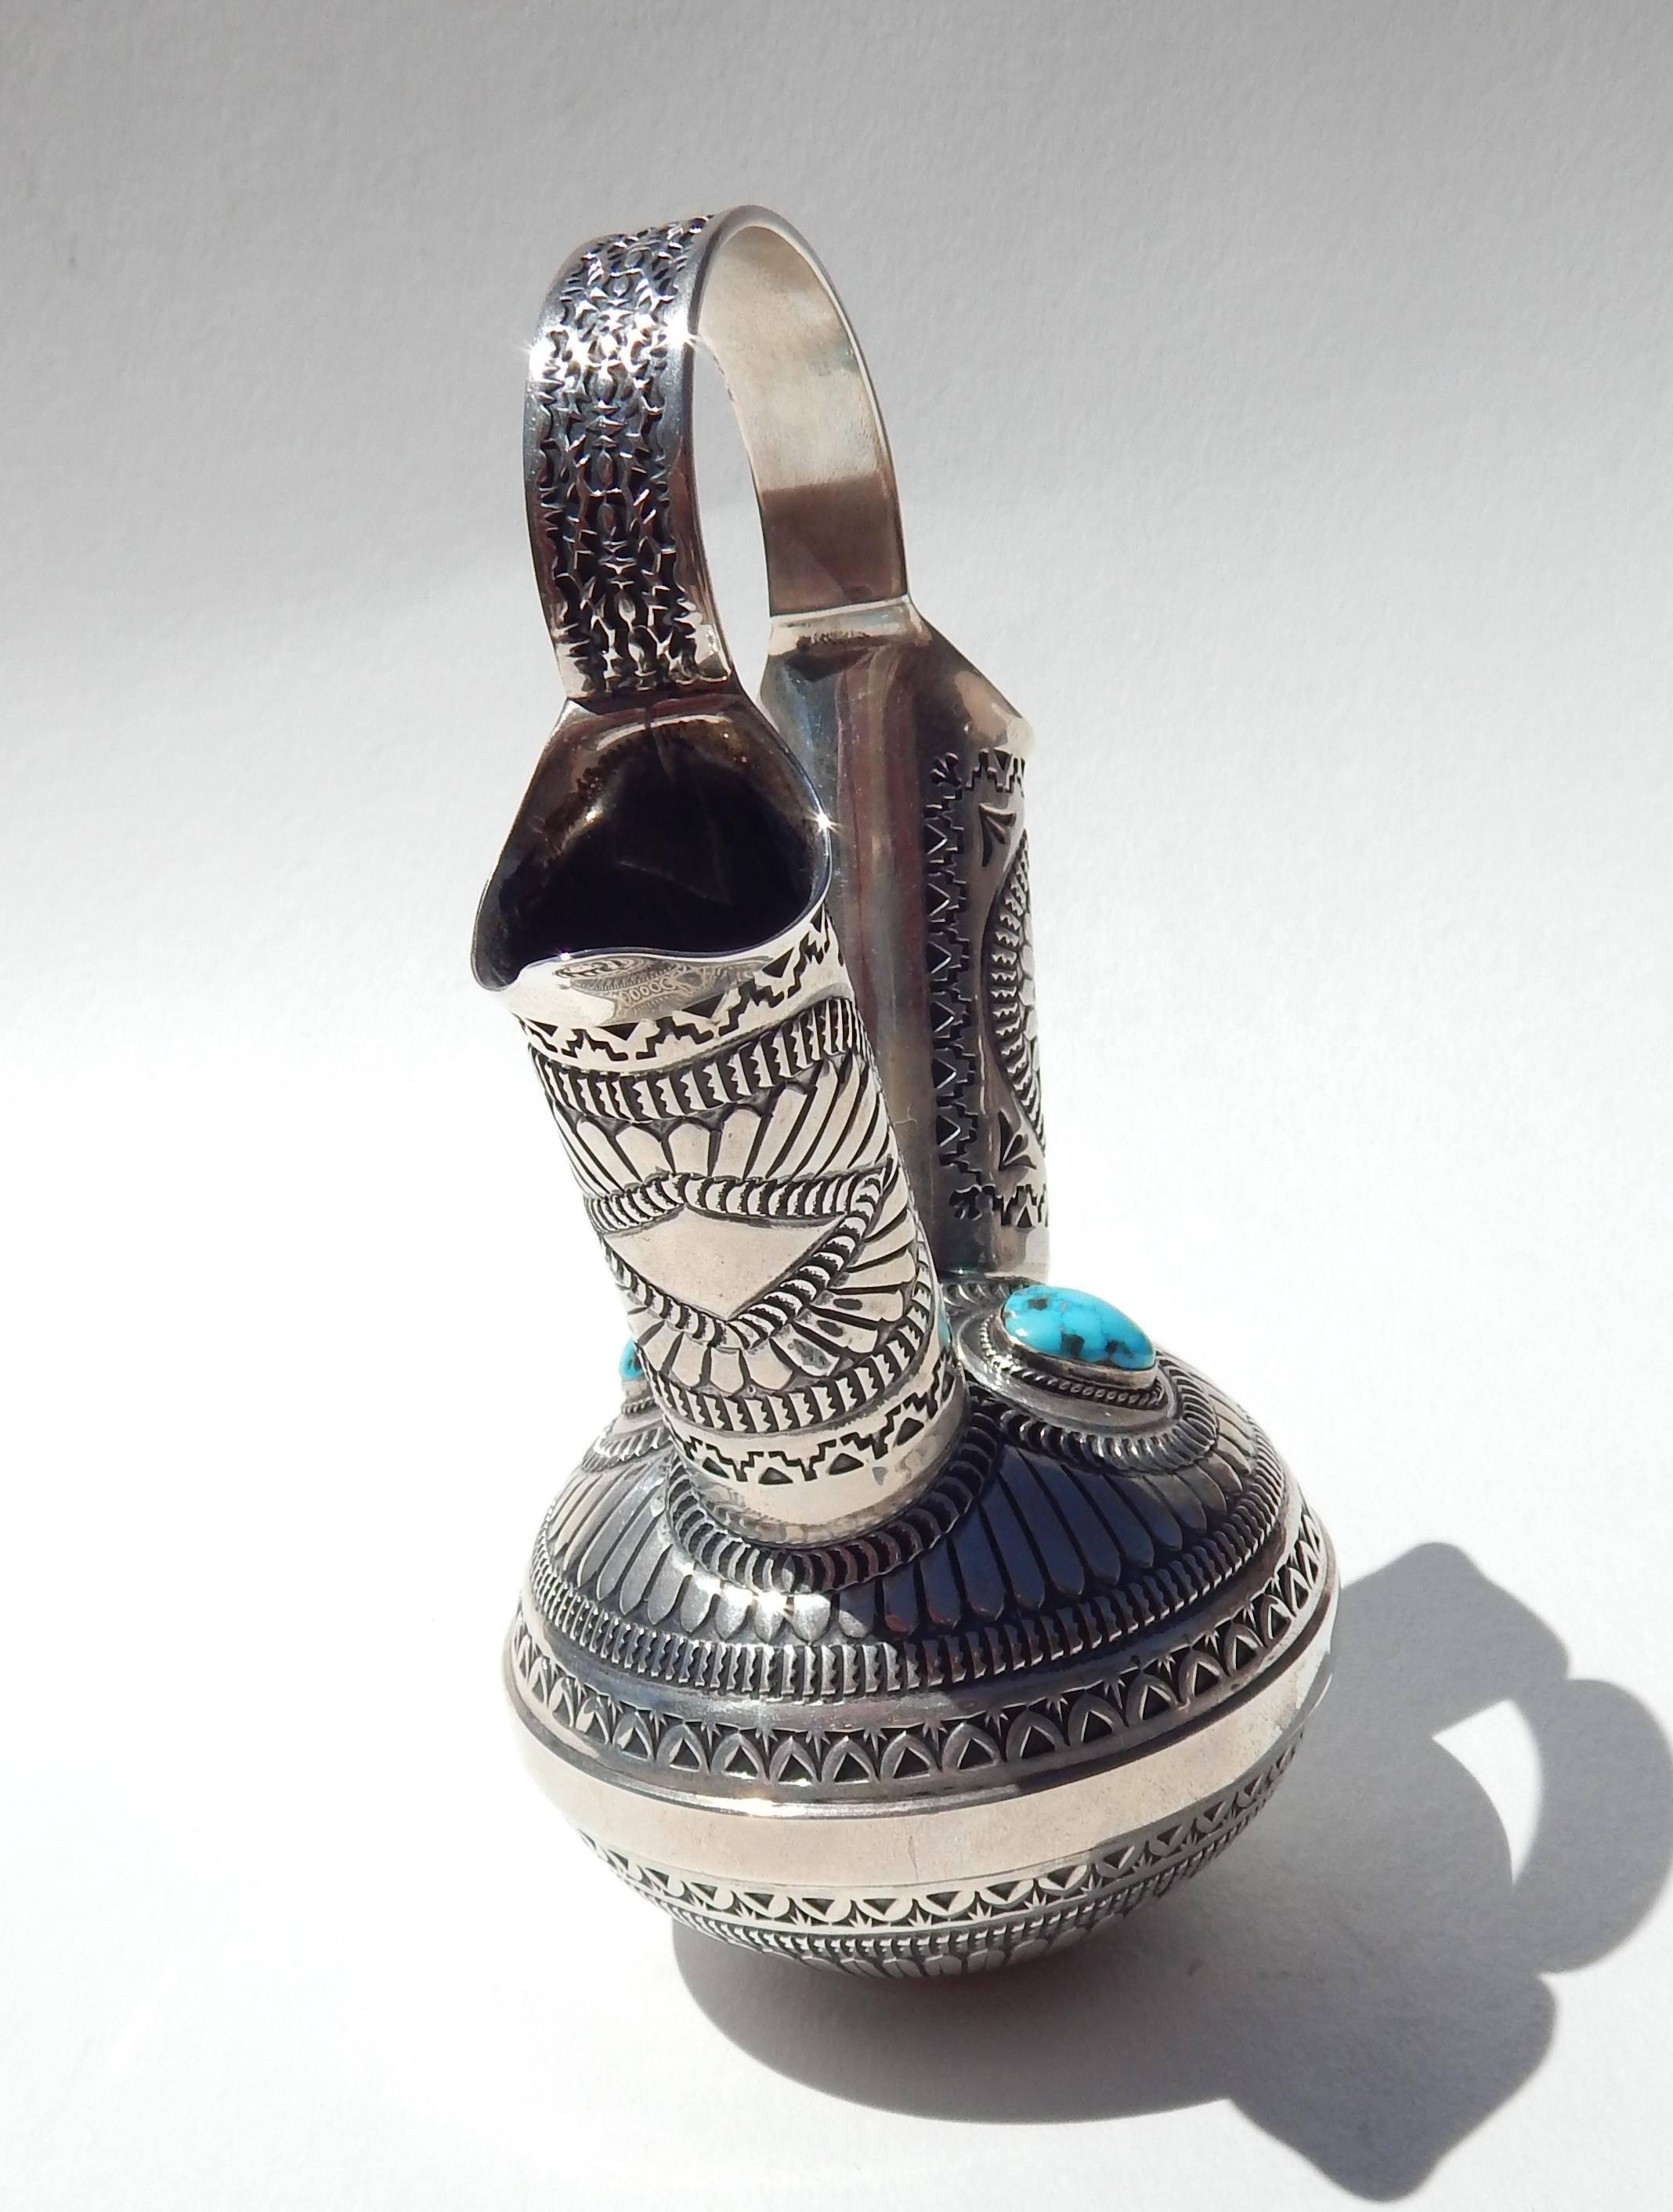 Beautiful hand stamped sterling vessel in the Navajo wedding vase style
by Native American Craftsman Sunshine Reeves.
Signed on the bottom “Sunshine Reeves” and marked sterling.
Decorated with a beautiful piece of turquoise on each side. 
In